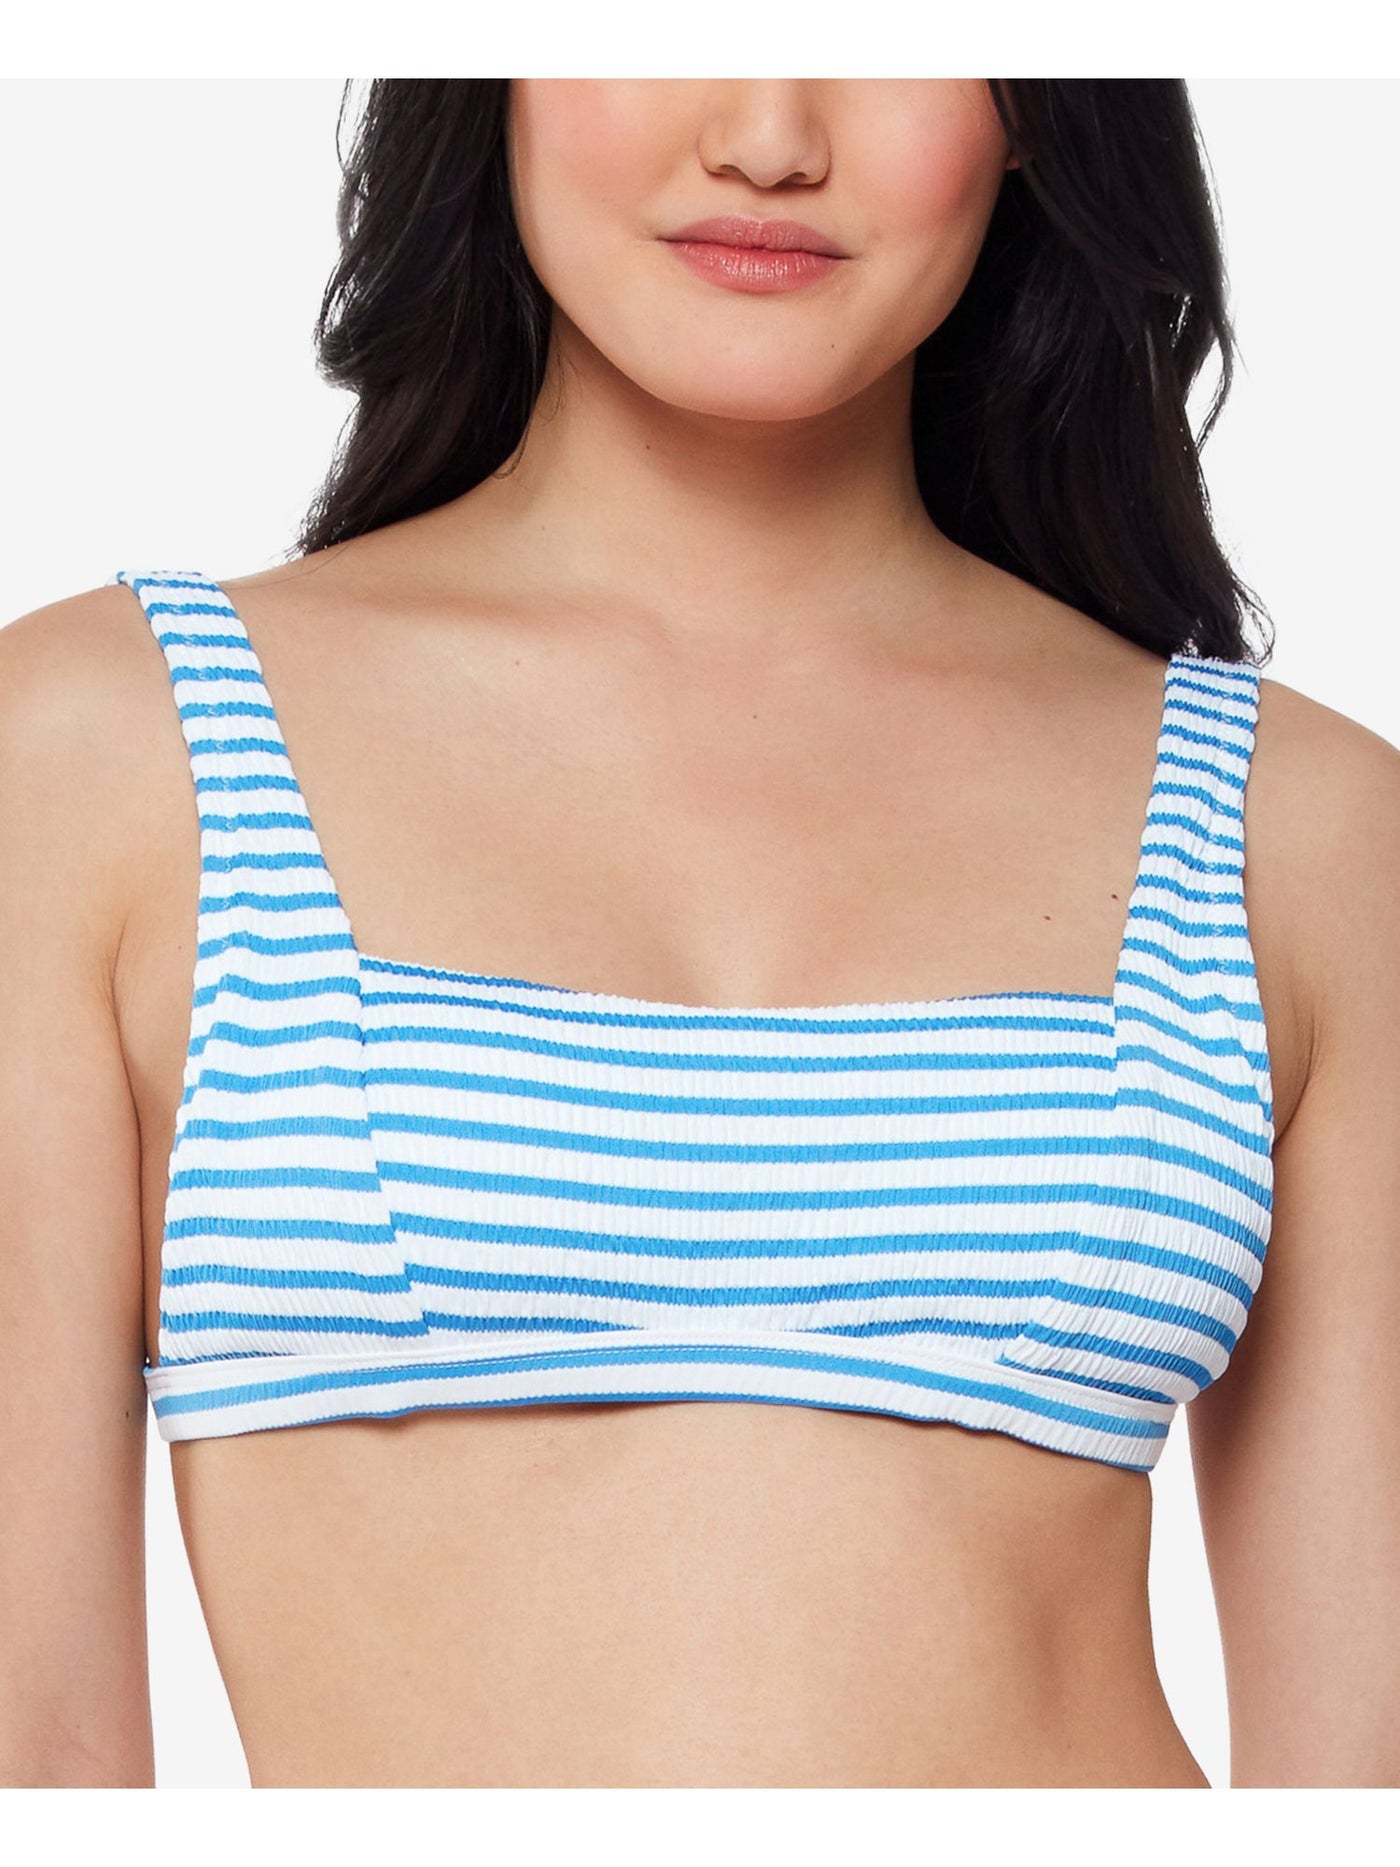 JESSICA SIMPSON Women's Blue Striped Stretch Removable Cups Tie Textured Adjustable Square Neck Swimsuit Top S